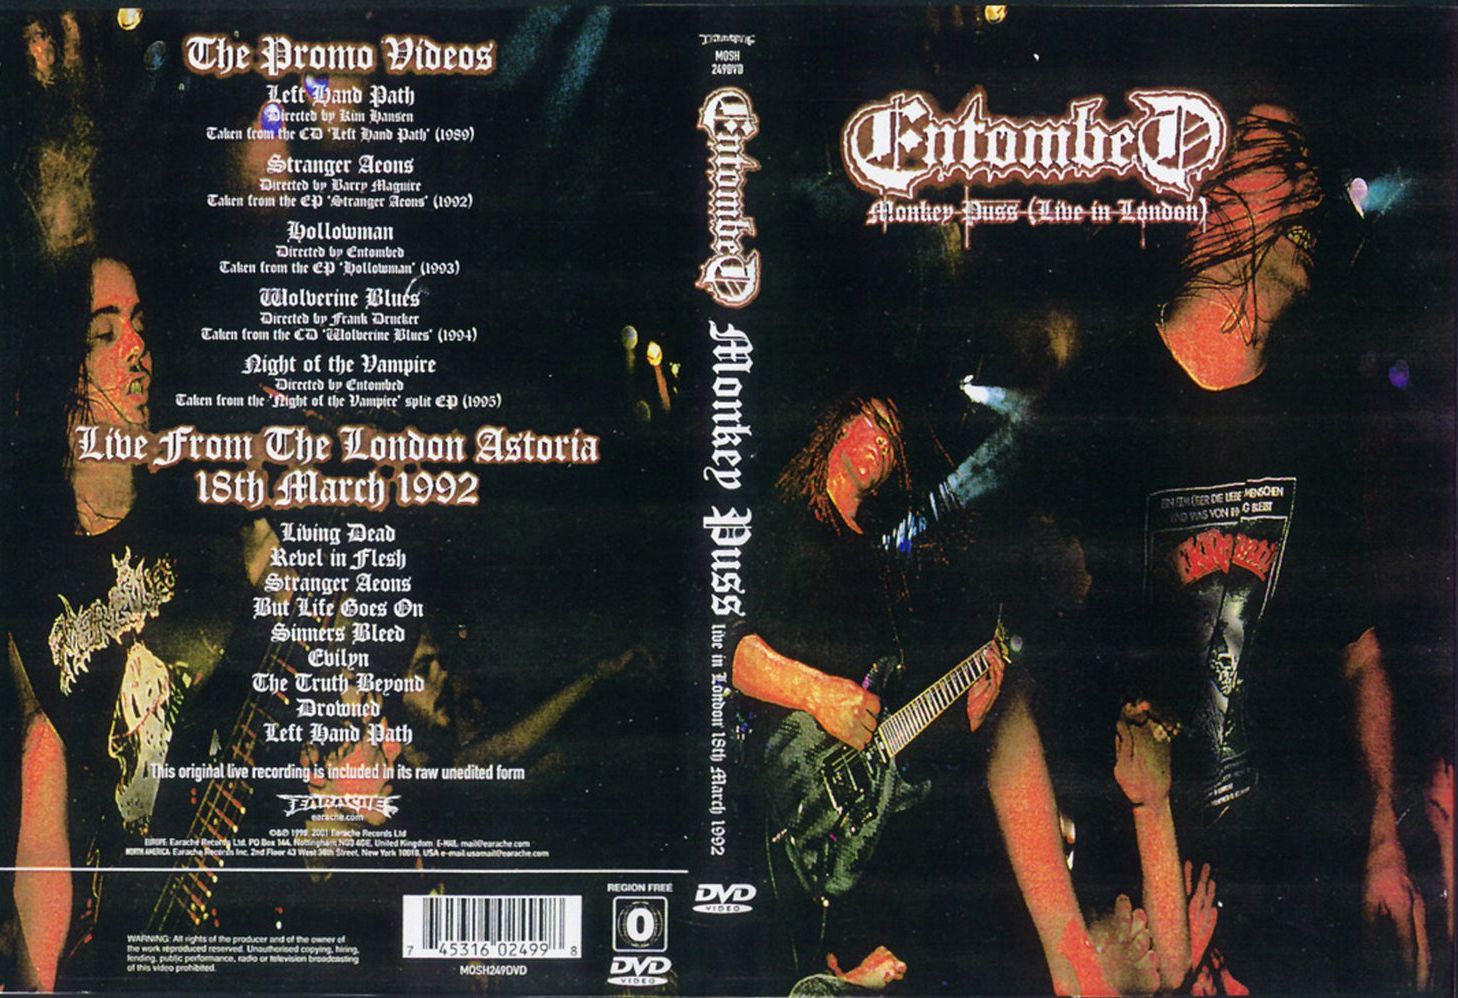 covery DVD - Entombed - Monkey Puss - Live In London.jpg